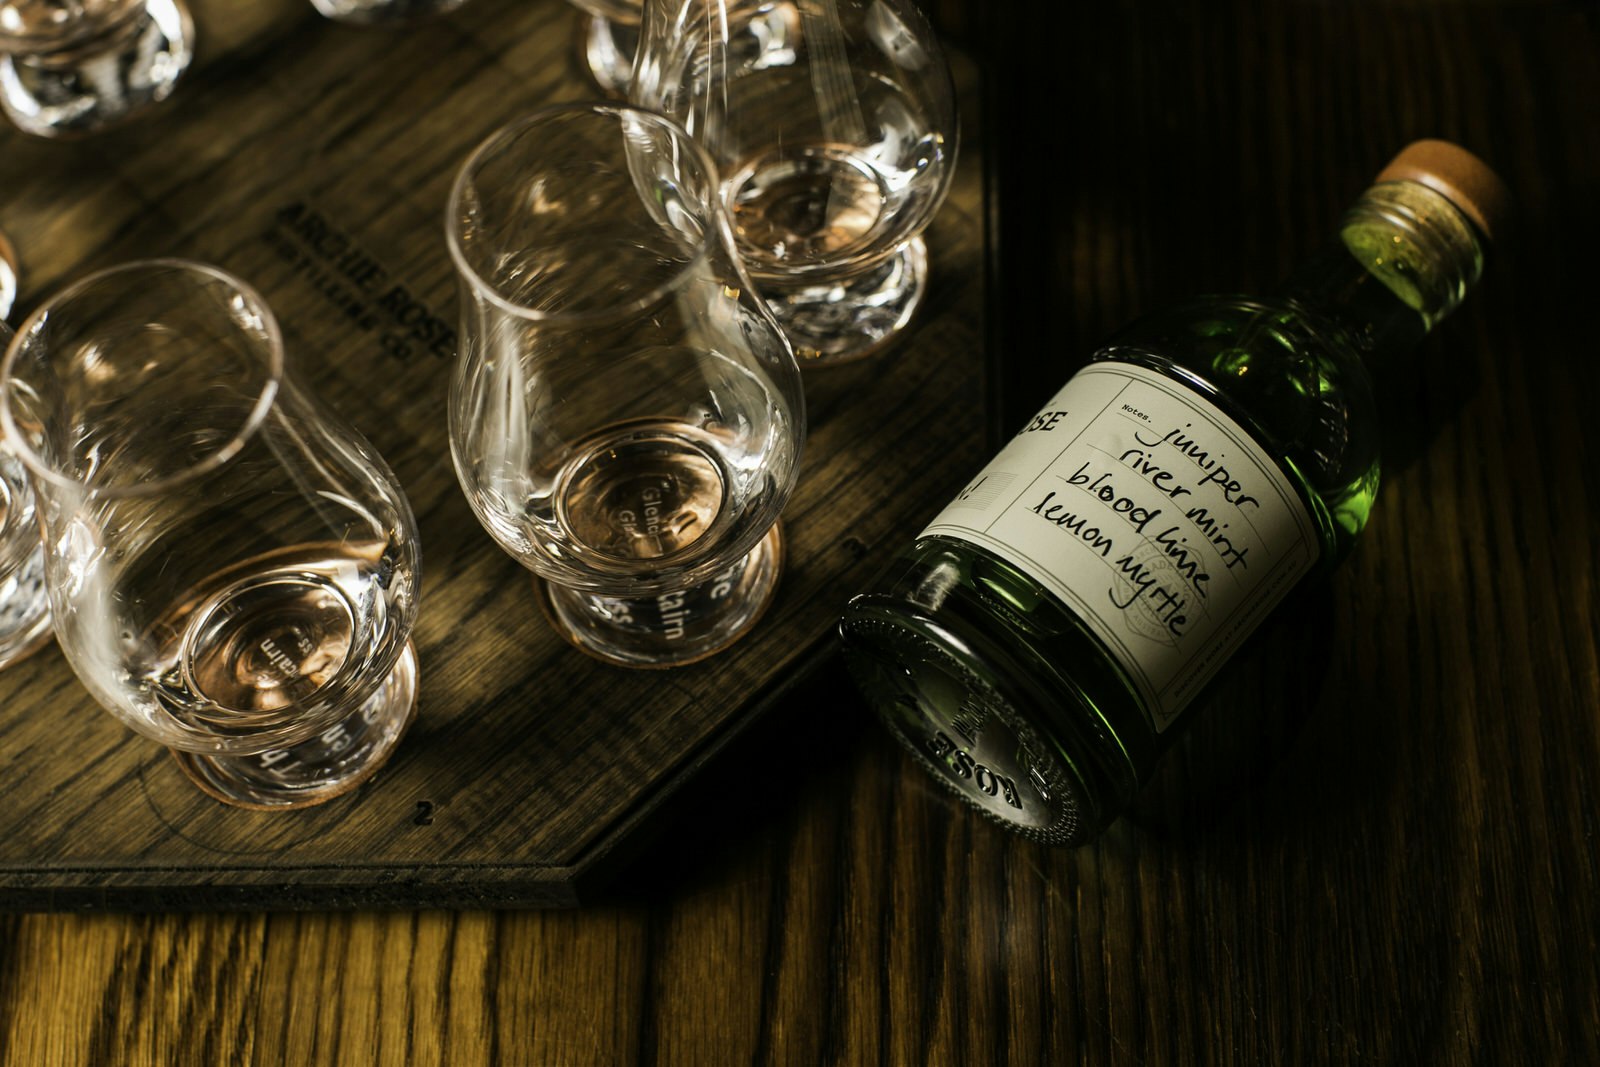 A small bottle of gin lies on its side on a wooden bar top next to several empty gin glasses. A hand-written label on the green bottle reads 'juniper river mint blood lime lemon myrtle'.